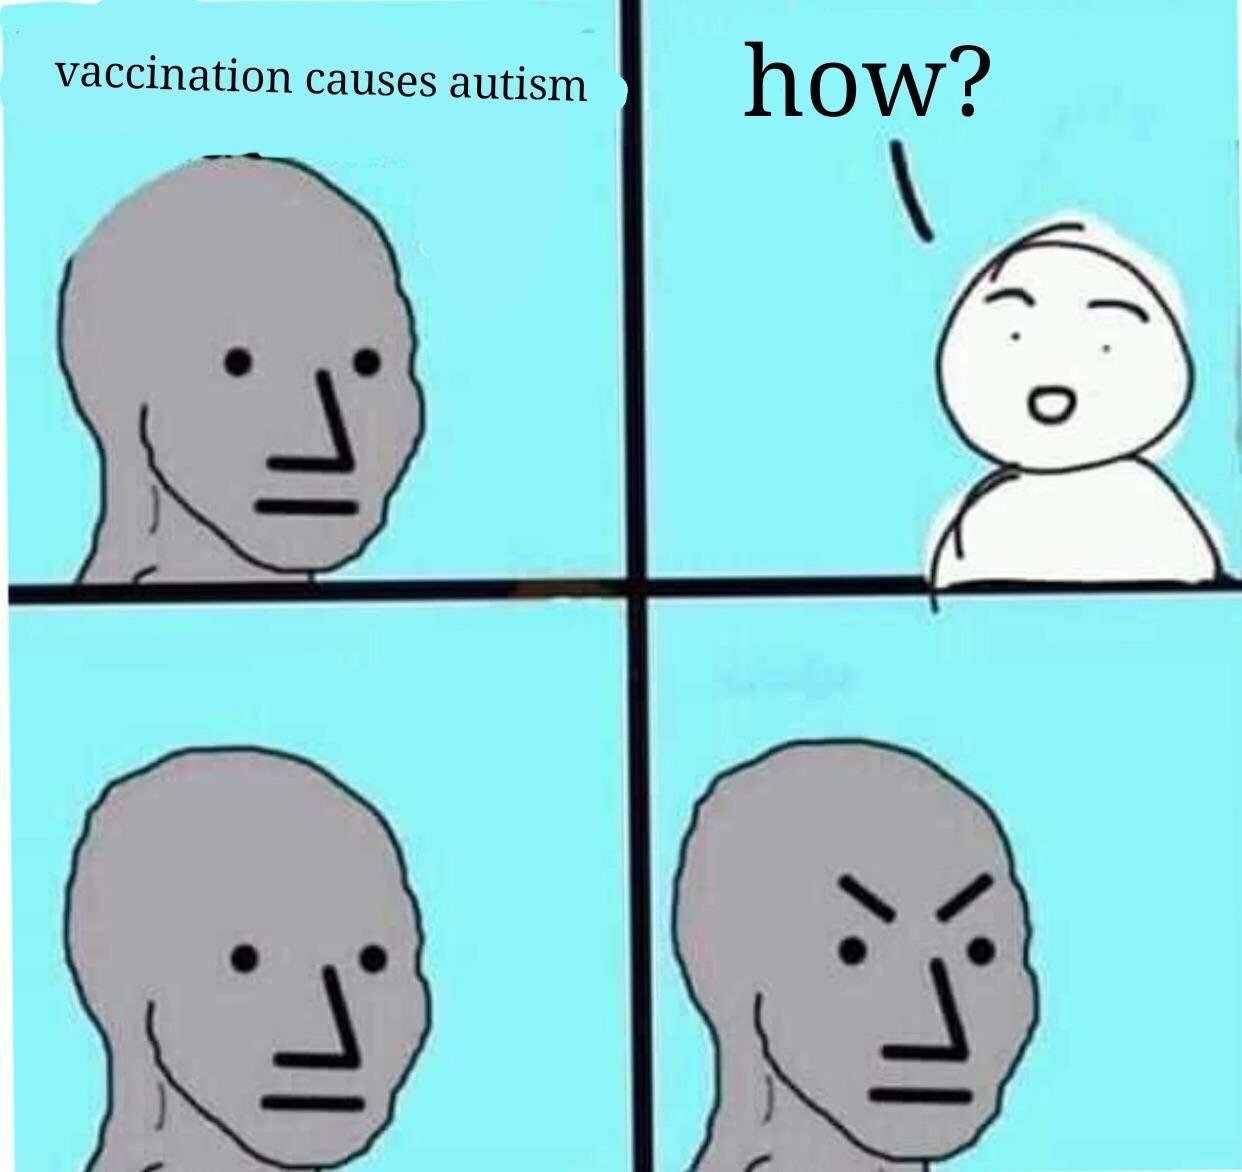 Theory: Autism causes vaccines.